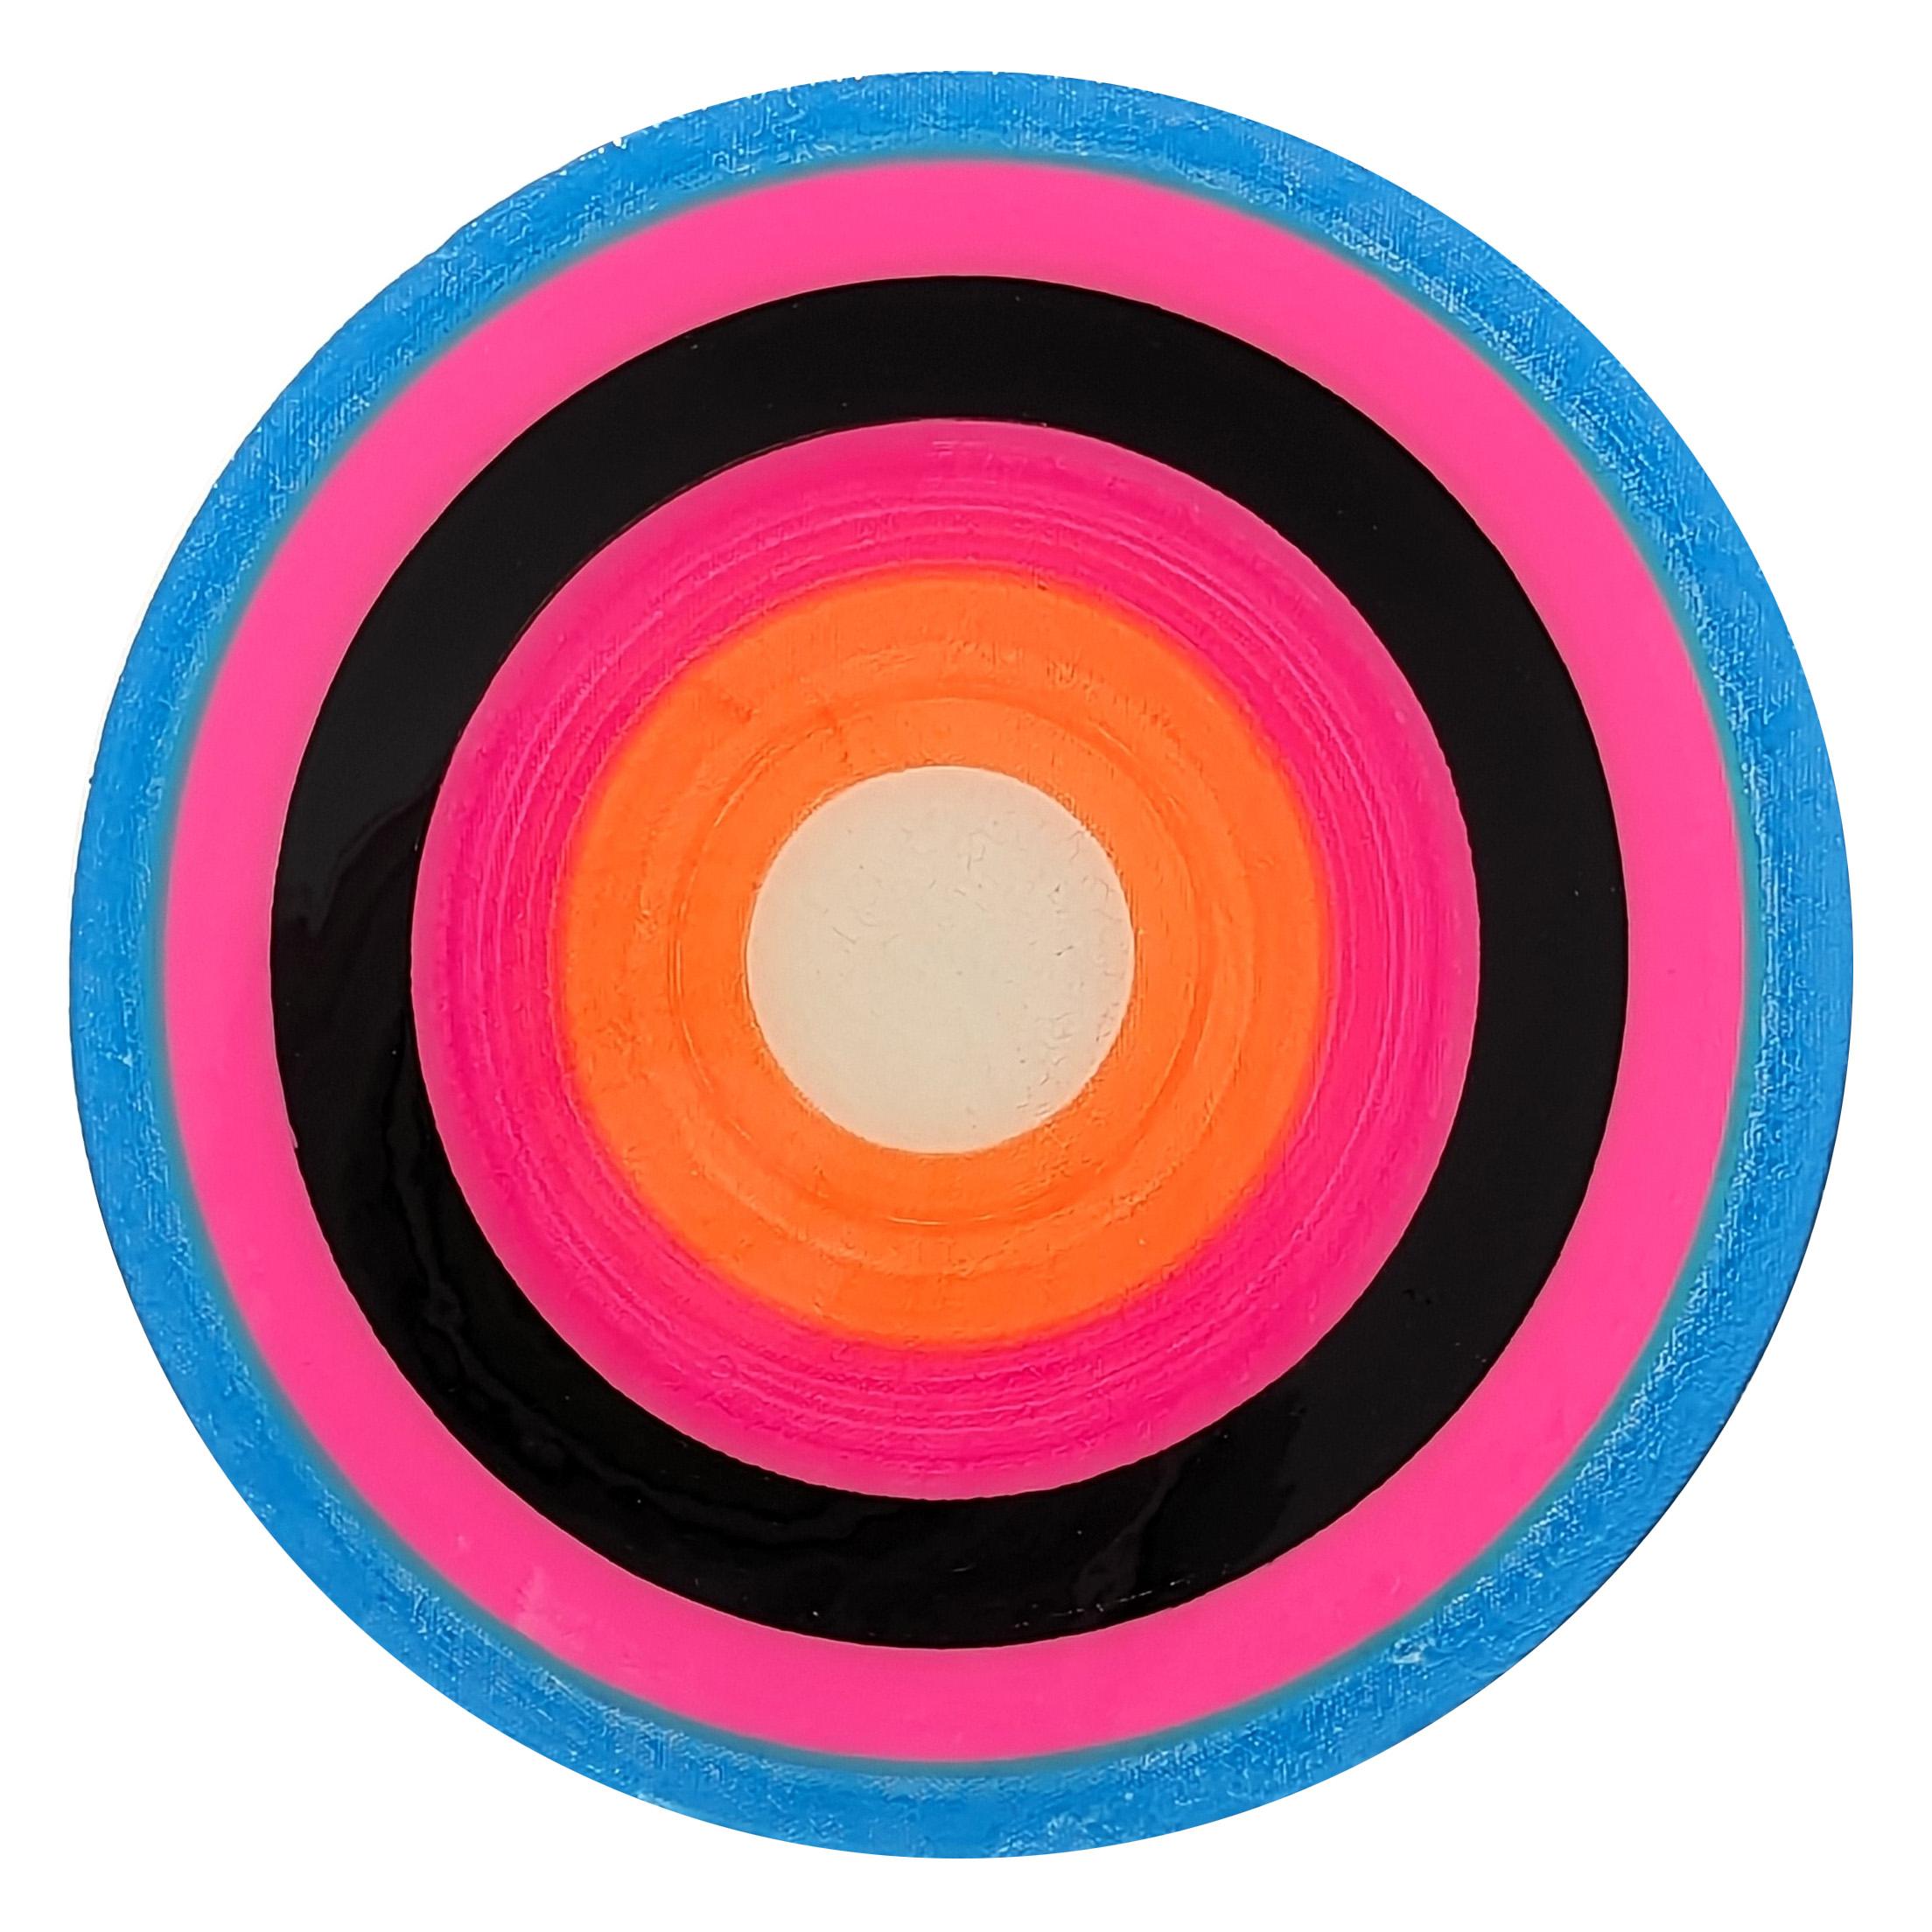 "Study for a Song 5" Contemporary Colorful Abstract Concentric Circle Painting – Mixed Media Art von David Hardaker